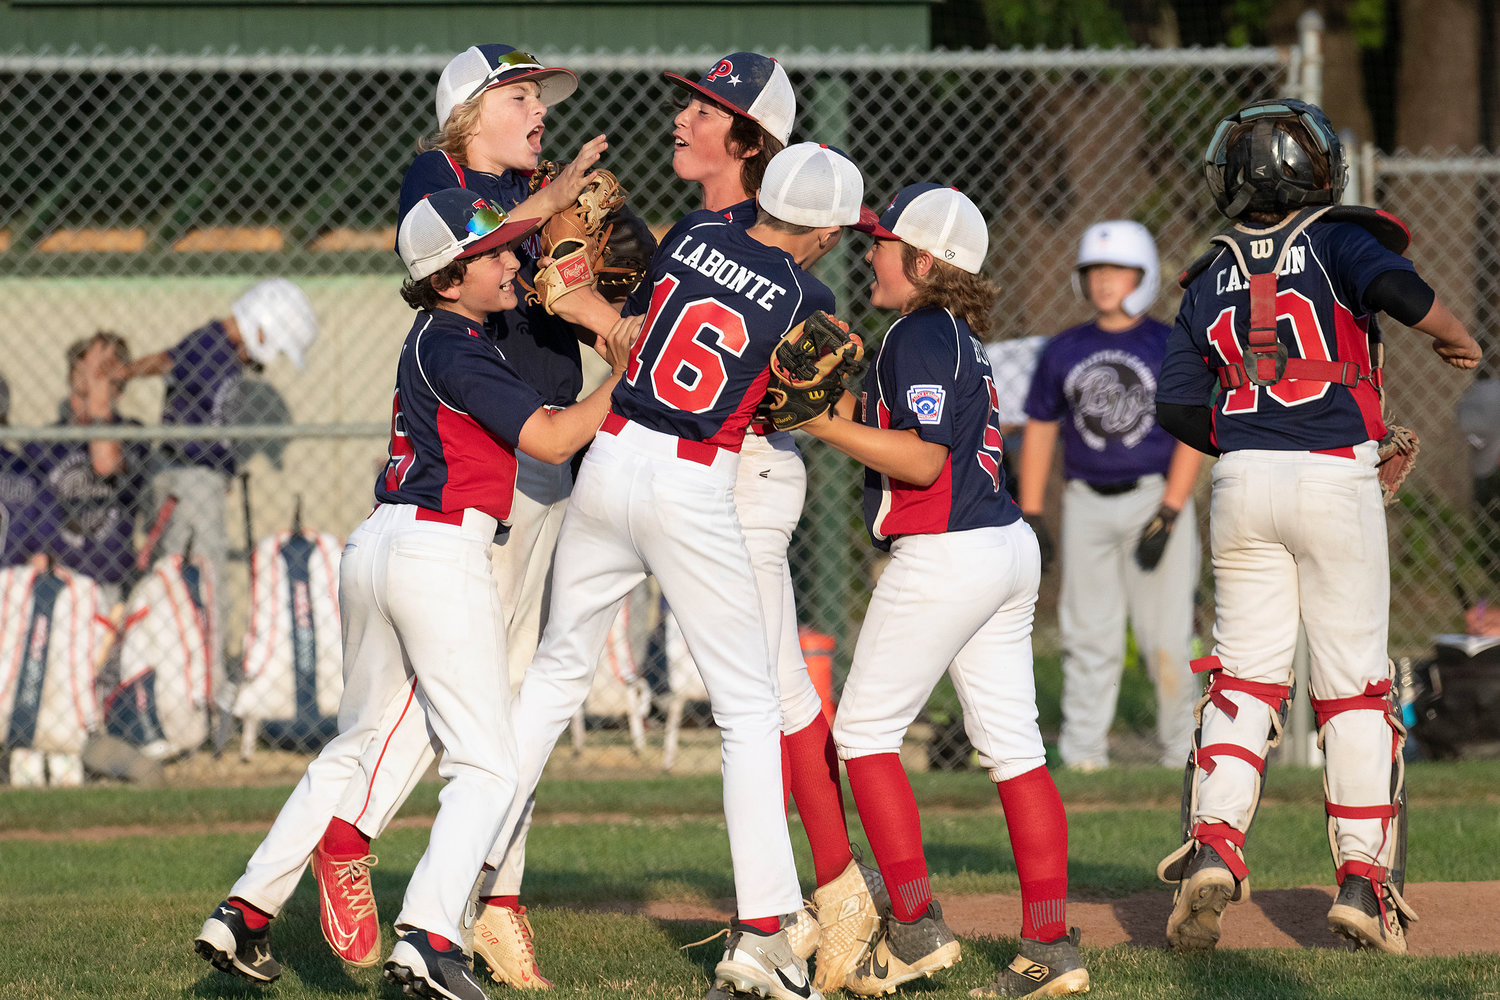 Portsmouth players, Carter Doran (left), Tyler Doucet, Jacob La Bonte, Kane Brule and Ryan Campion celebrate with pitcher Ben Humm (middle) after they beat Bristol-Warren and secure a spot in the District 2 championship at Sherman field on Saturday.